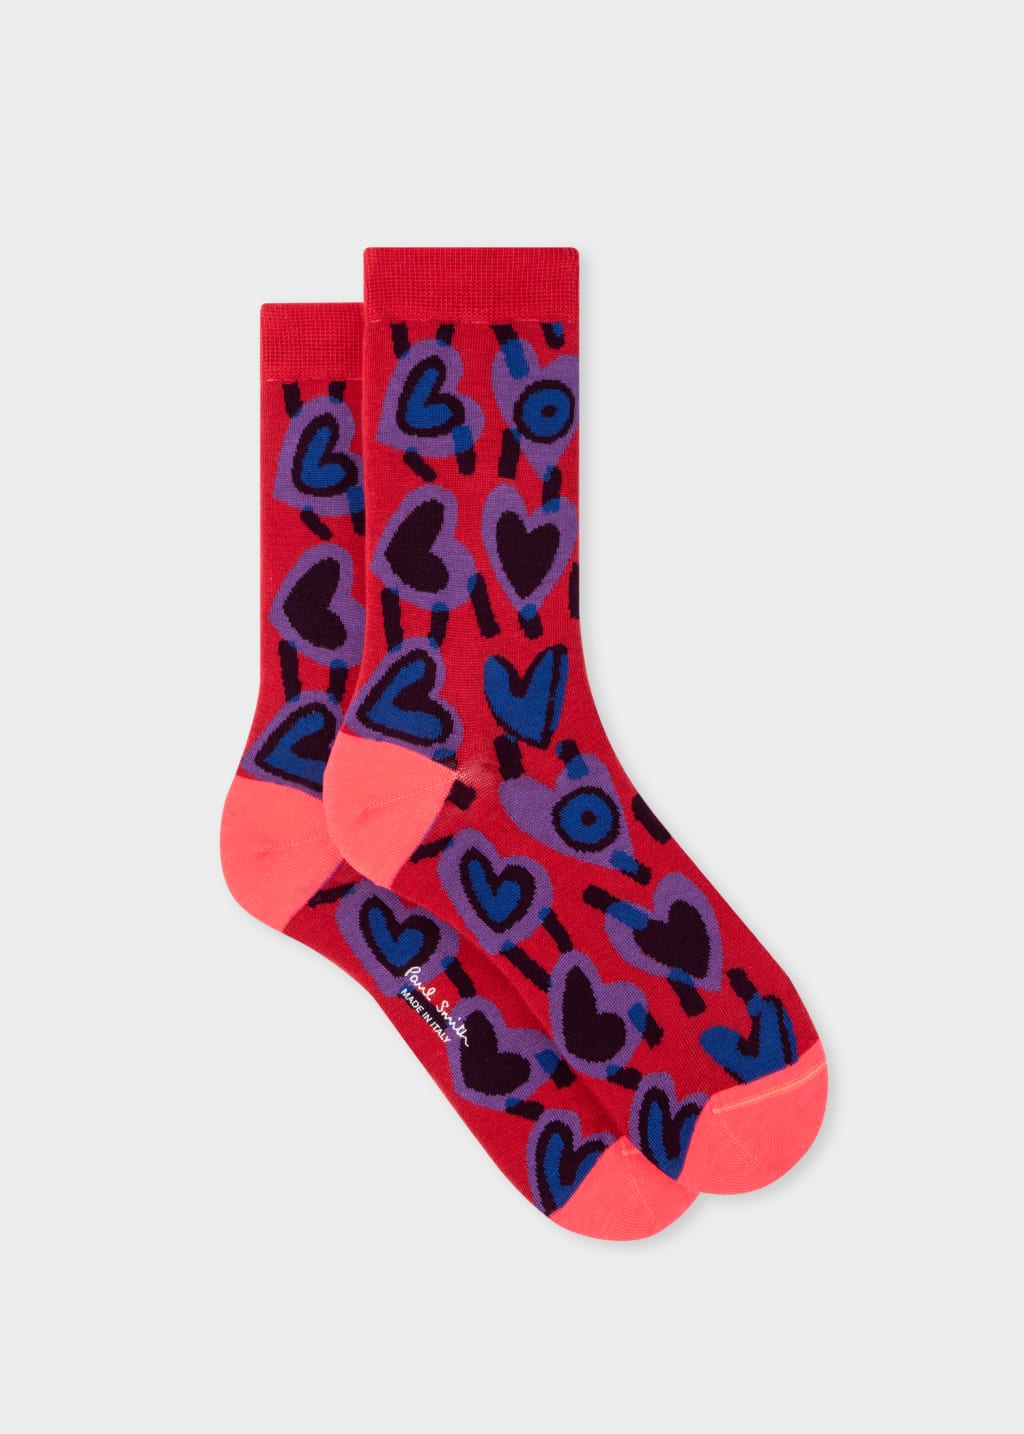 Product View - Women's Red 'Valentines' Socks by Paul Smith